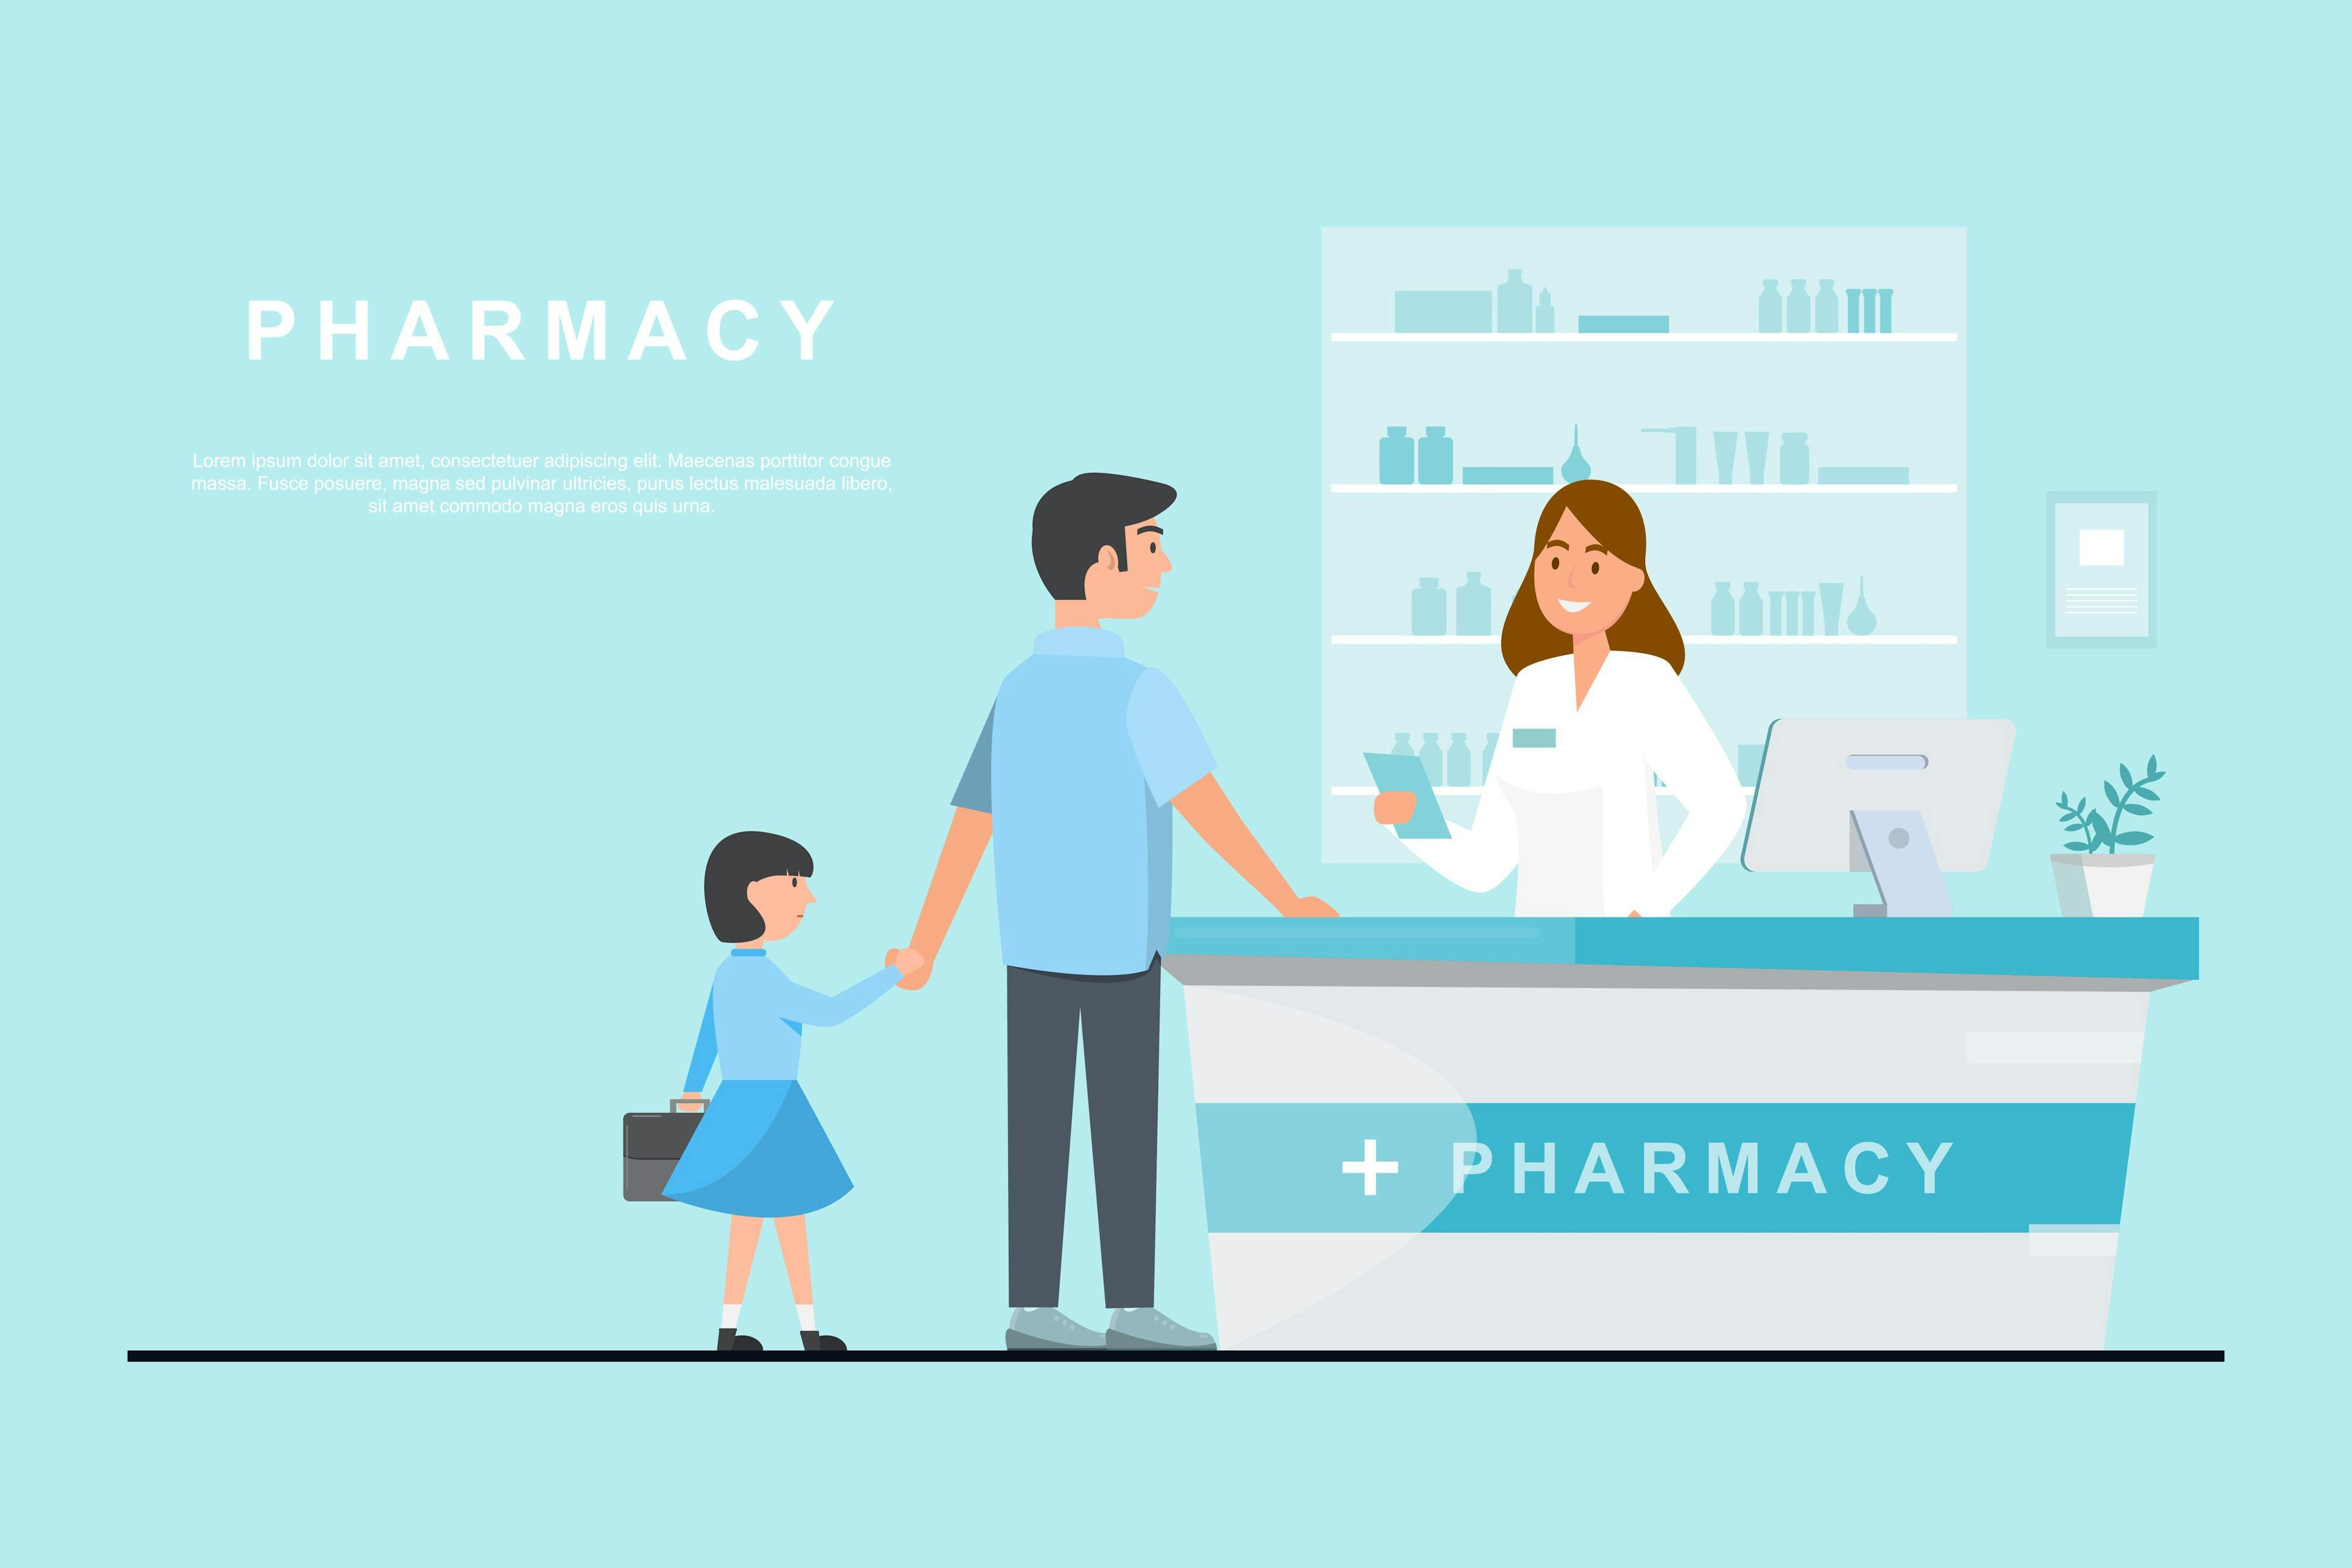 Five Trends Transforming Pharmacies into Wellness Centers of the Future